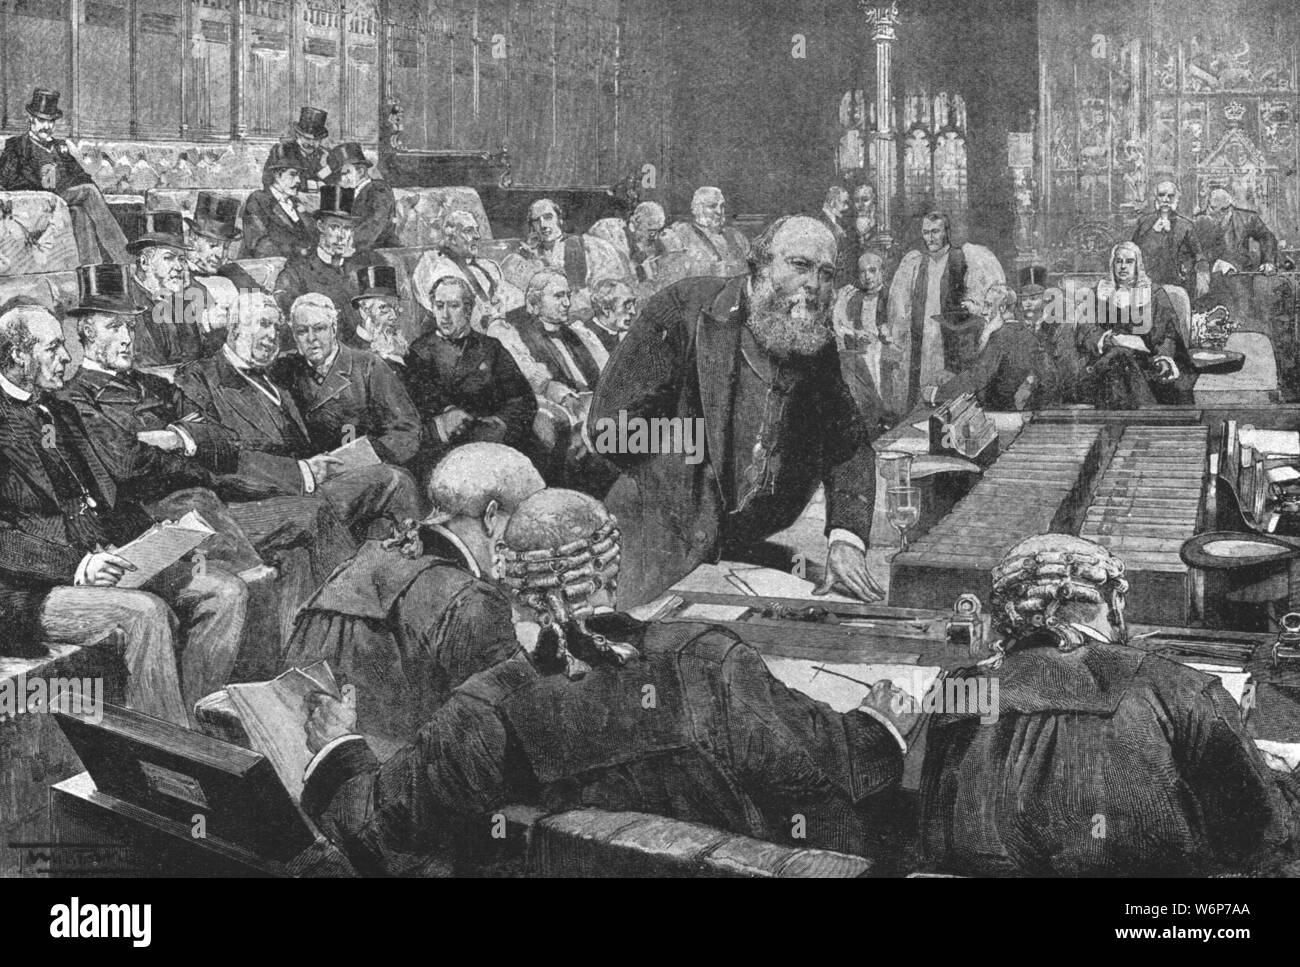 'The Ministerial Bench of the House of Lords, 1886-1892', (1901). Scene in the Palace of Westminster in London, during the final term of the Marquis of Salisbury as prime minister (1886-1892). British Conservative politican Robert Arthur Talbot Gascoyne-Cecil, 3rd Marquis of Salisbury (1830-1903) served as prime minister three times for a total of over thirteen years. He was the last prime minister to head his full administration from the House of Lords. From &quot;The Illustrated London News Record of the Glorious Reign of Queen Victoria 1837-1901: The Life and Accession of King Edward VII. a Stock Photo